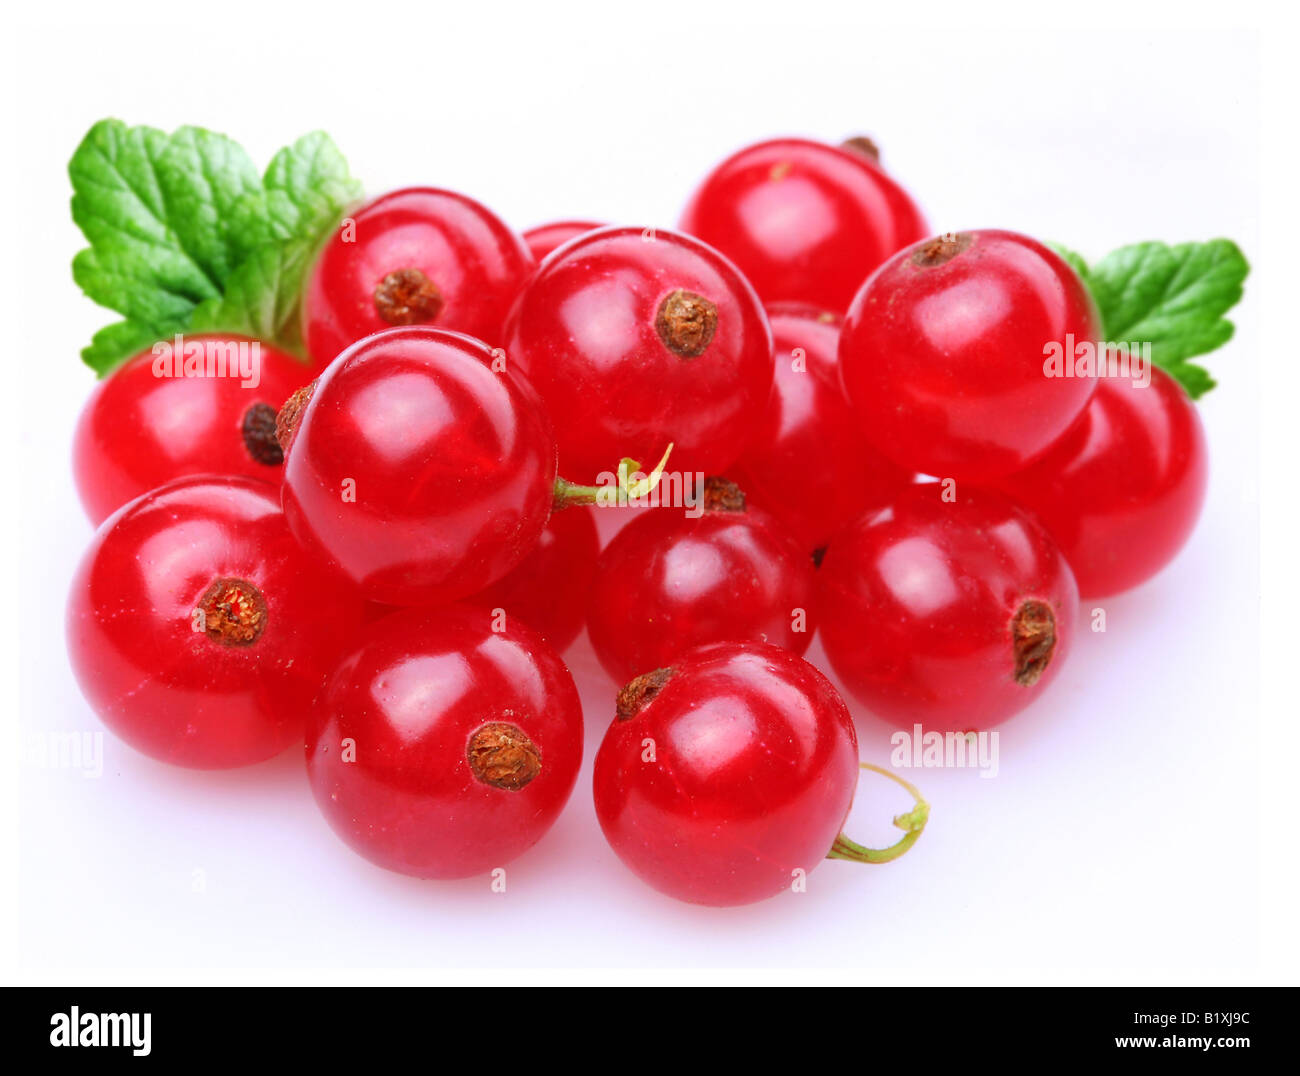 Currant object on a white background Stock Photo